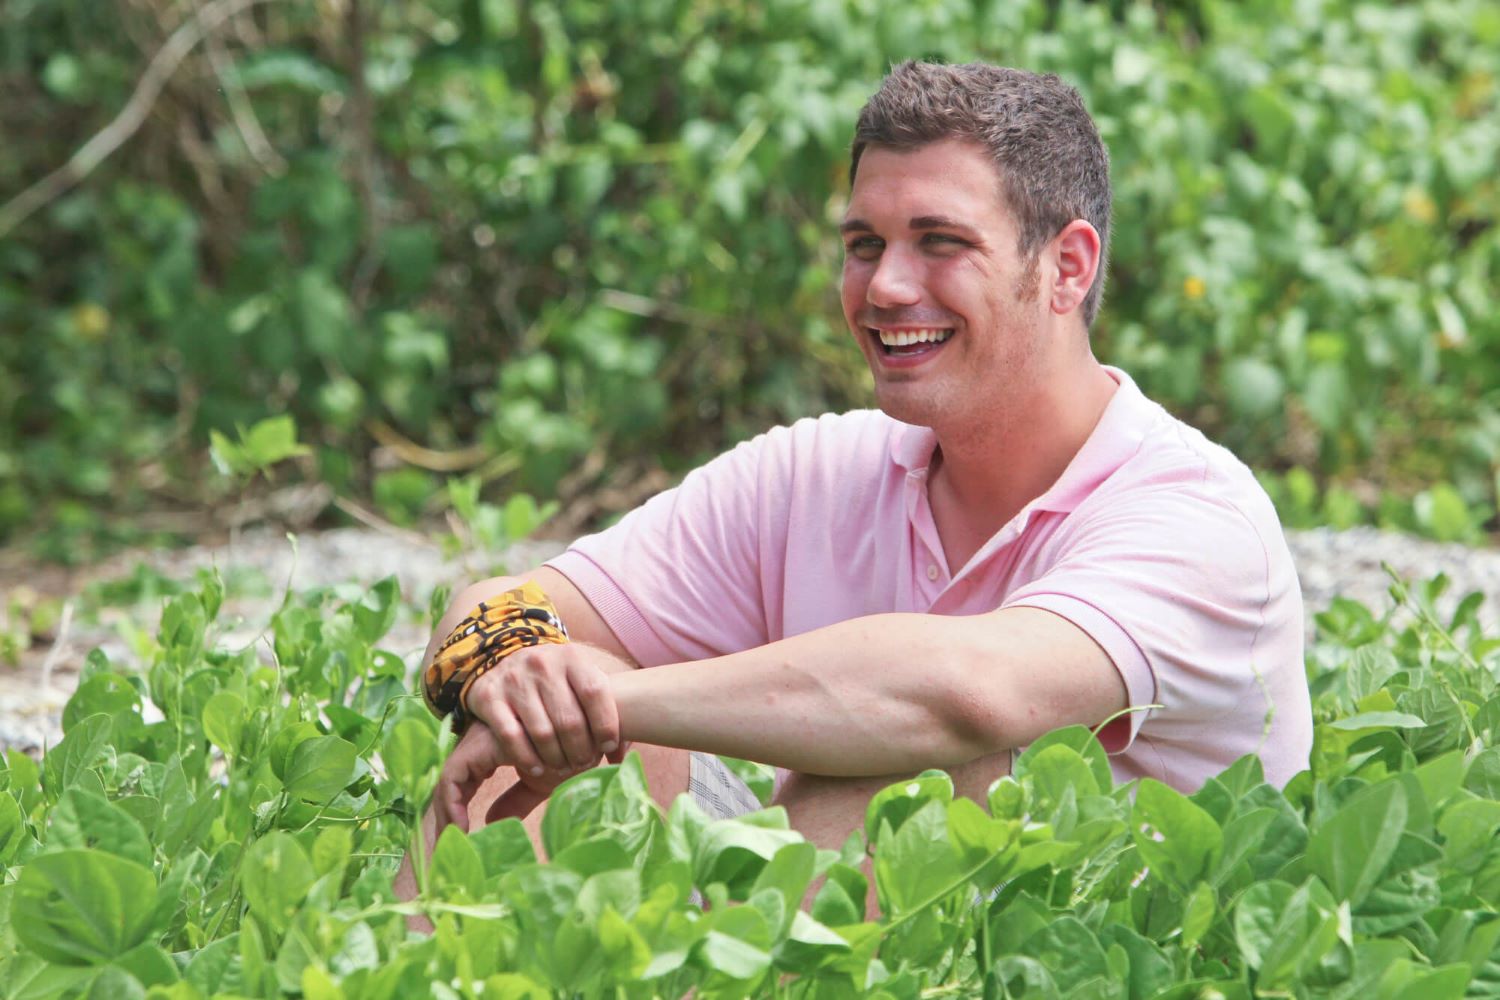 Colton Cumbie , who likely didn't get paid for appearing on 'Survivor: Blood vs. Water,' wears a light pink polo shirt and his yellow buff around his wrist.